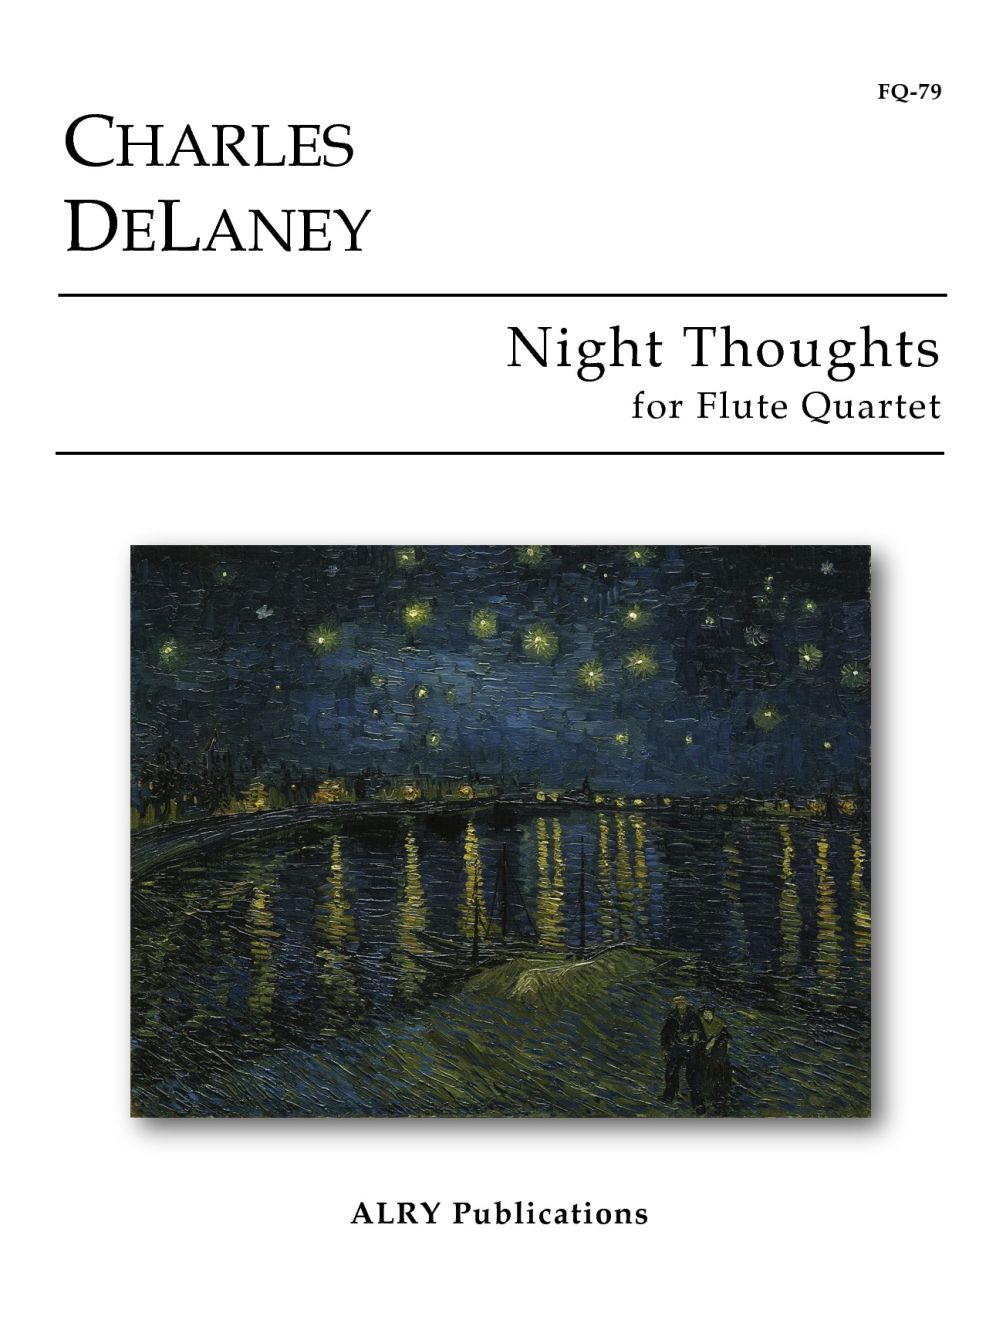 Night Thoughts (DELANEY CHARLES)